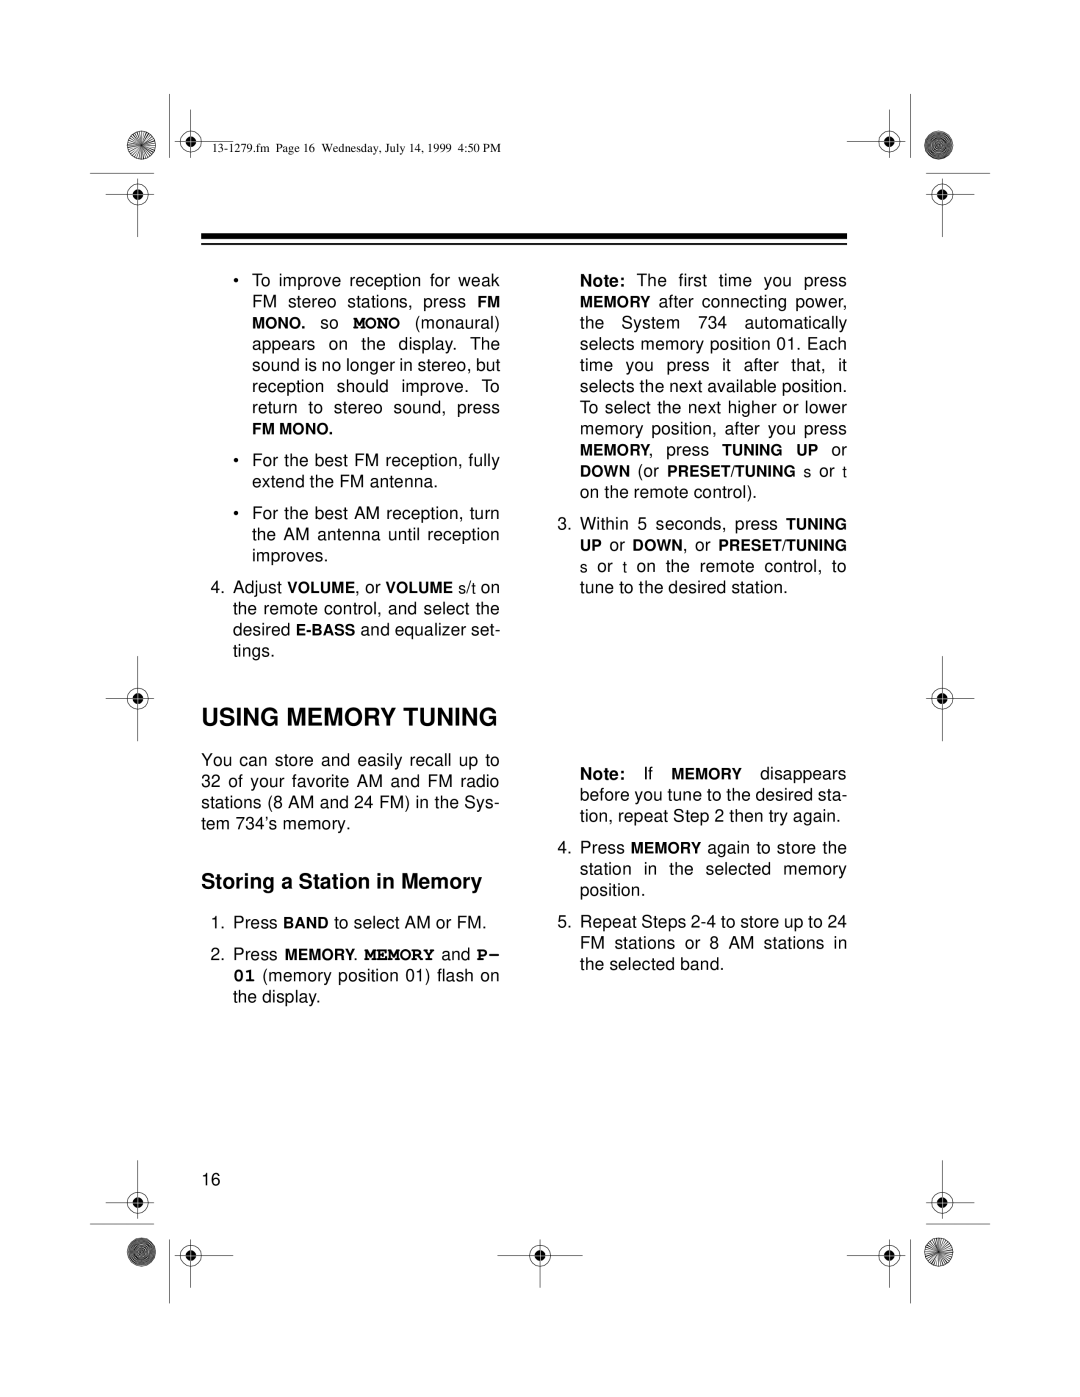 Optimus SYSTEM 734 owner manual Using Memory Tuning, Storing a Station in Memory 